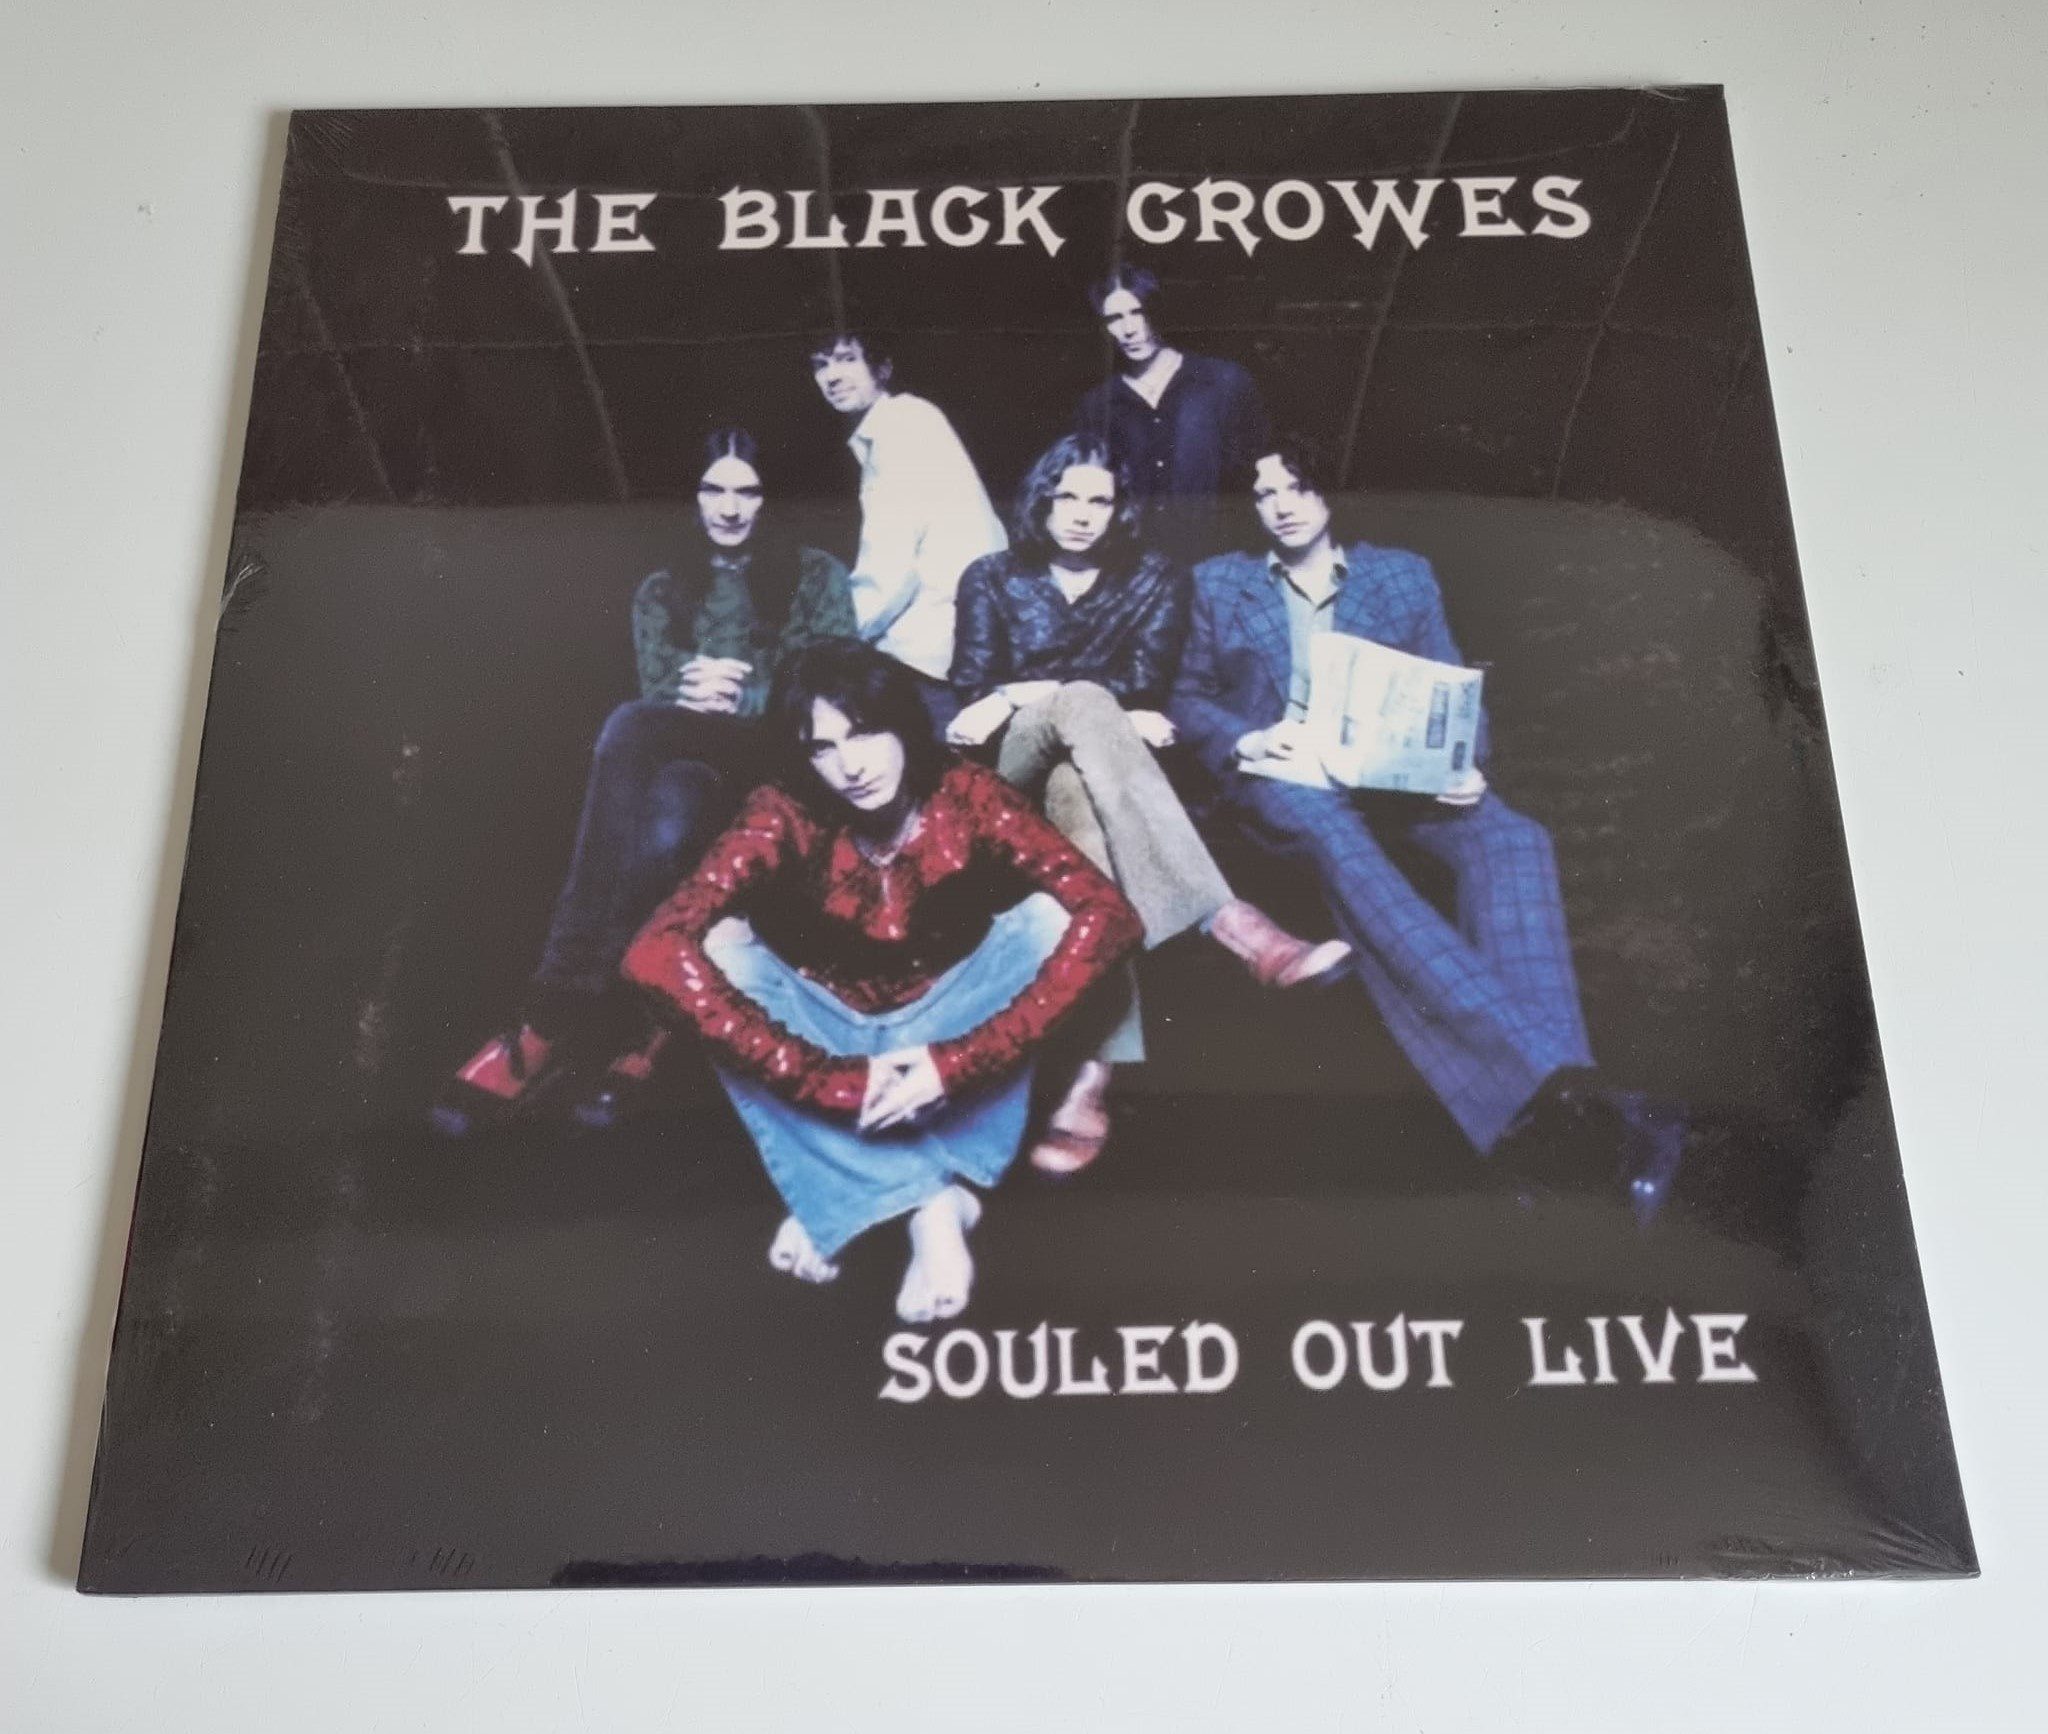 Buy this rare Black Crowes record by clicking here